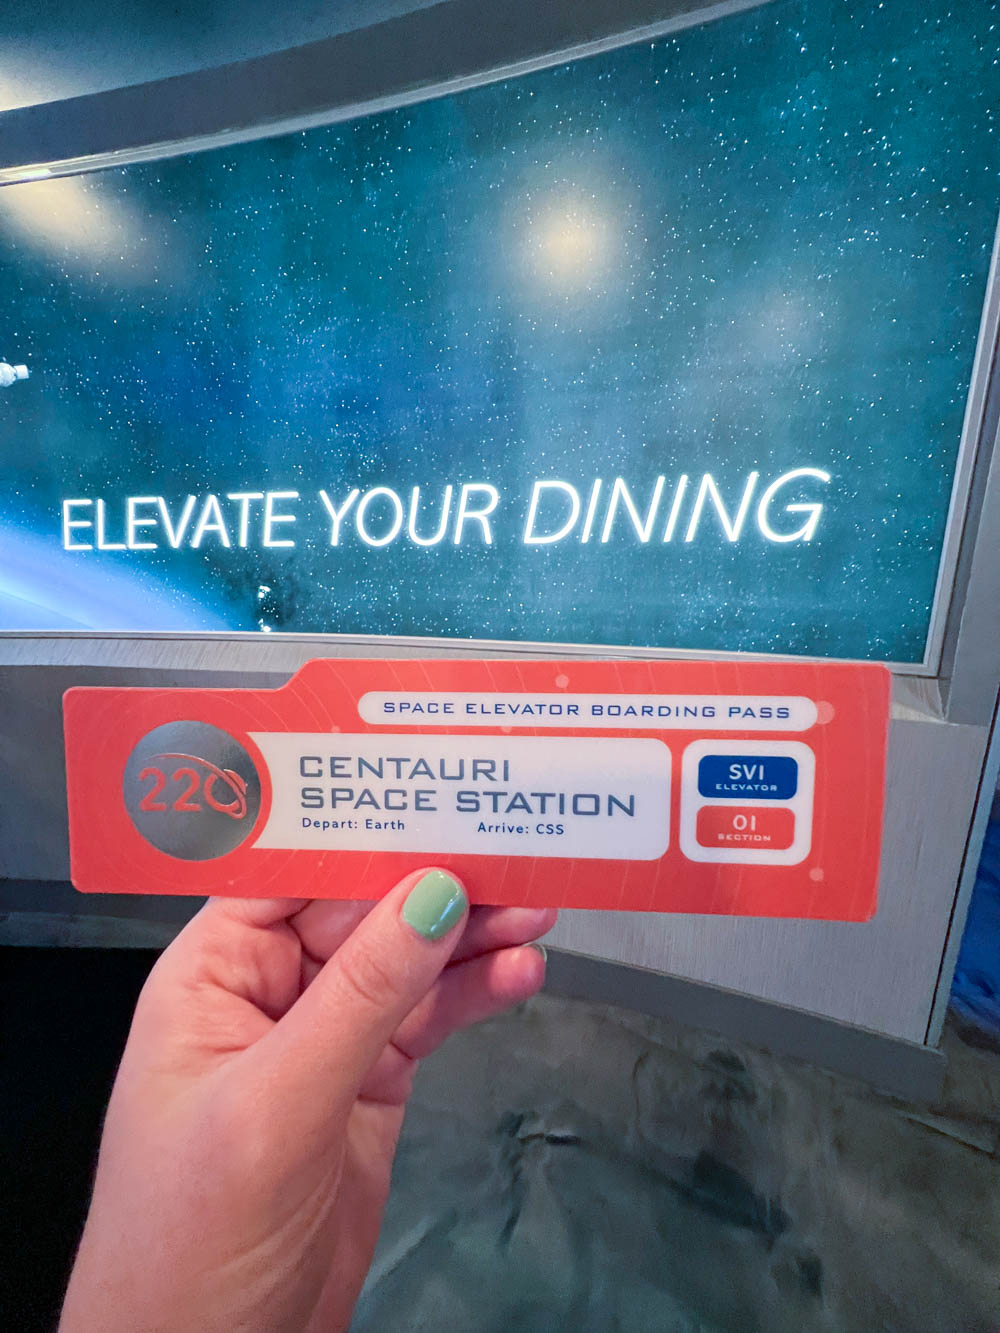 Explore the Diverse Dining Options at Epcot - Space 220